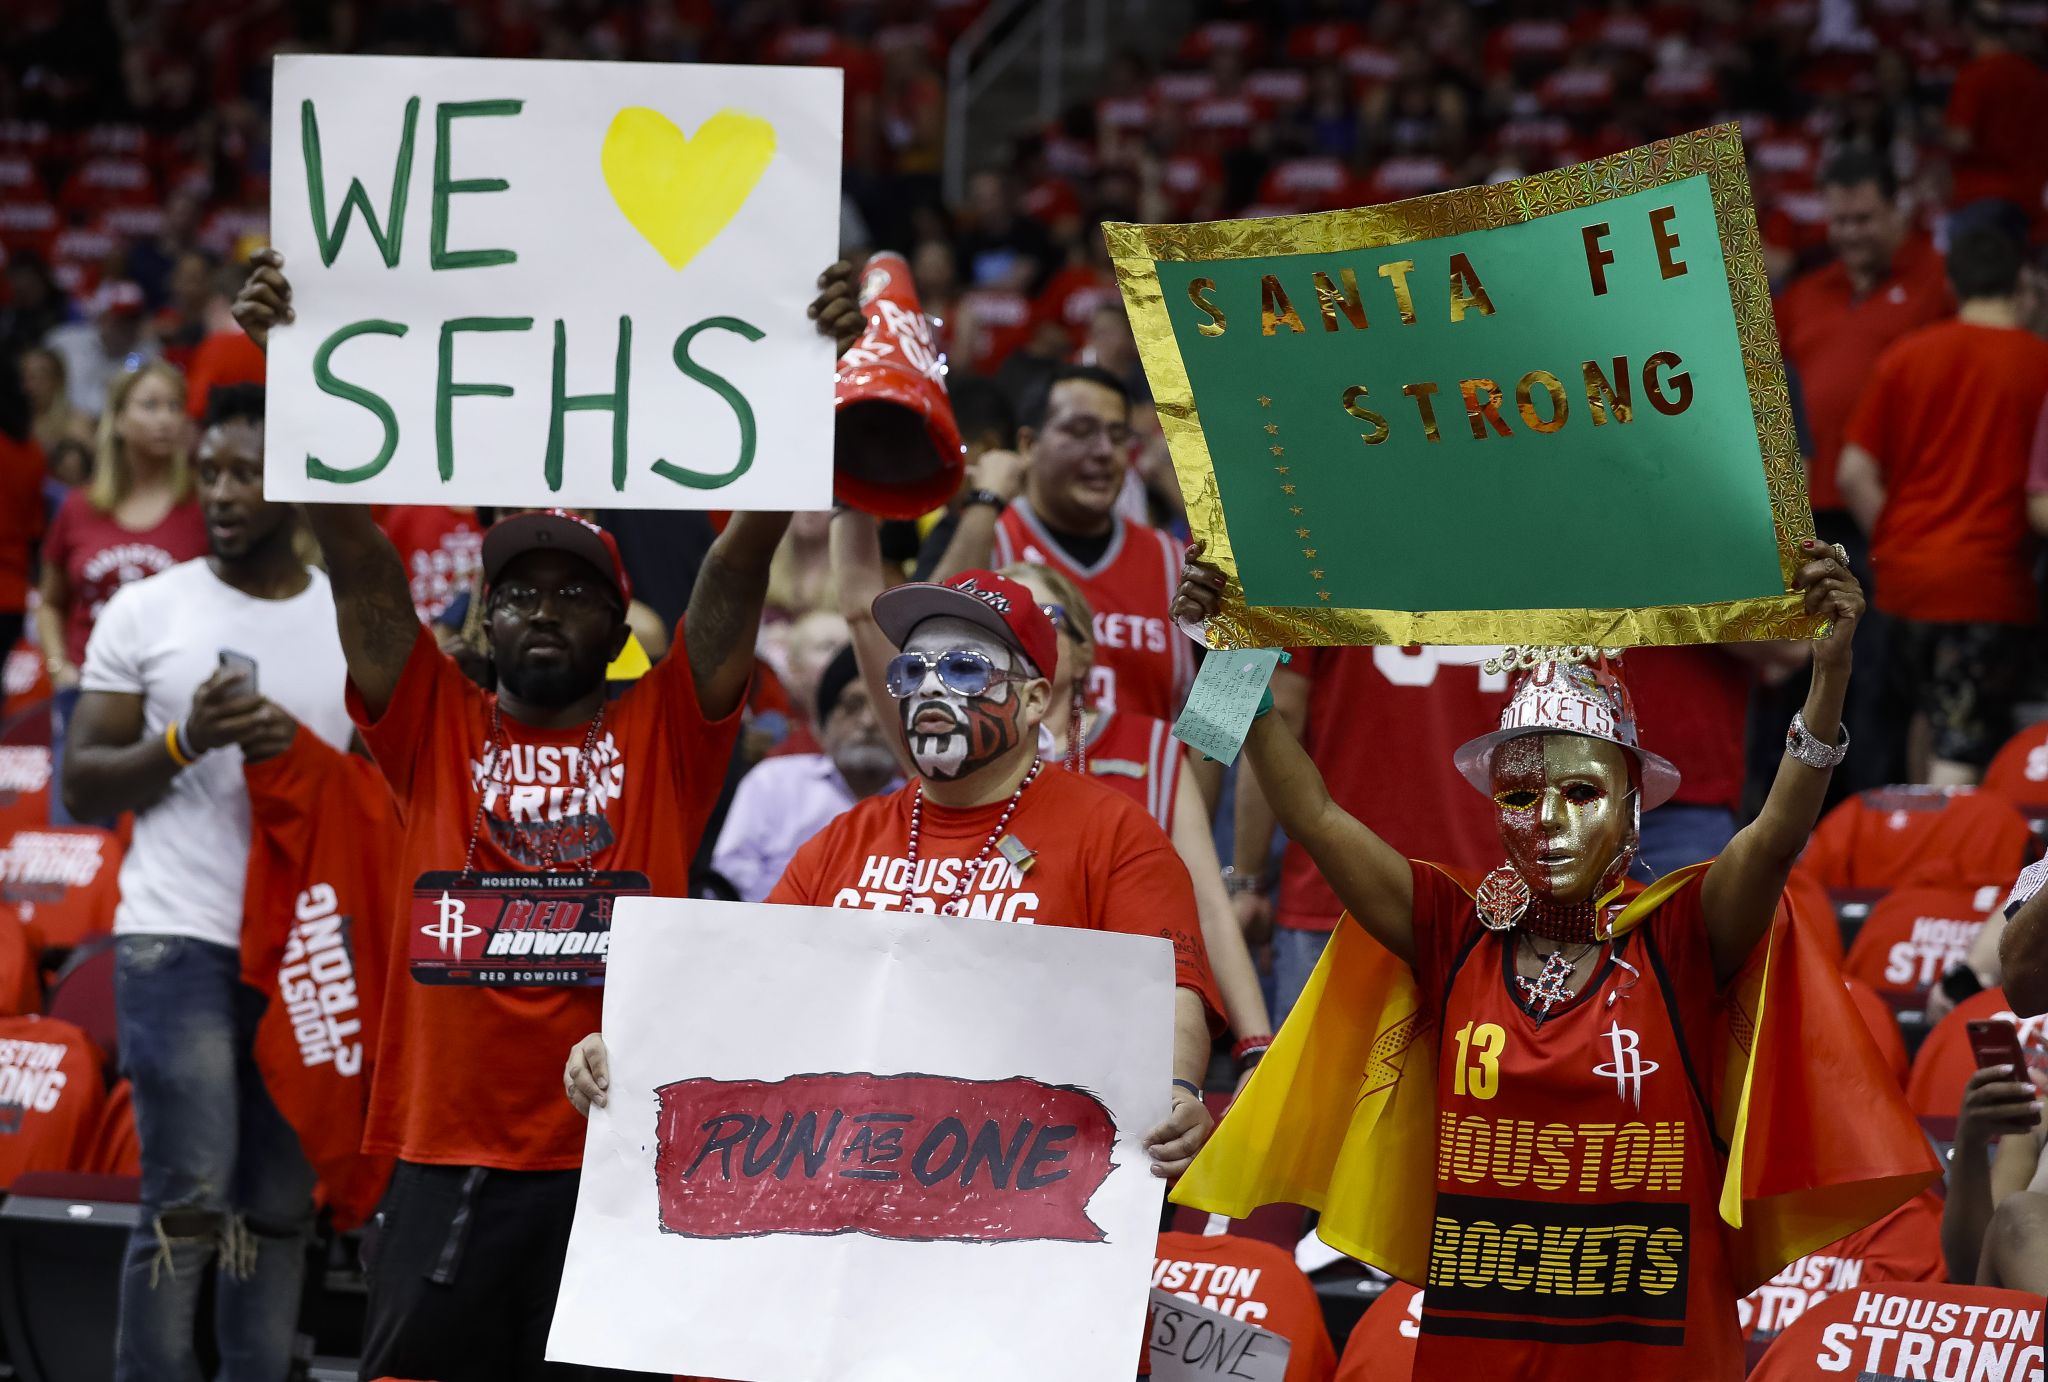 Rockets sell out Game 6 watch party at Toyota Center to benefit Santa Fe Memorial Fund